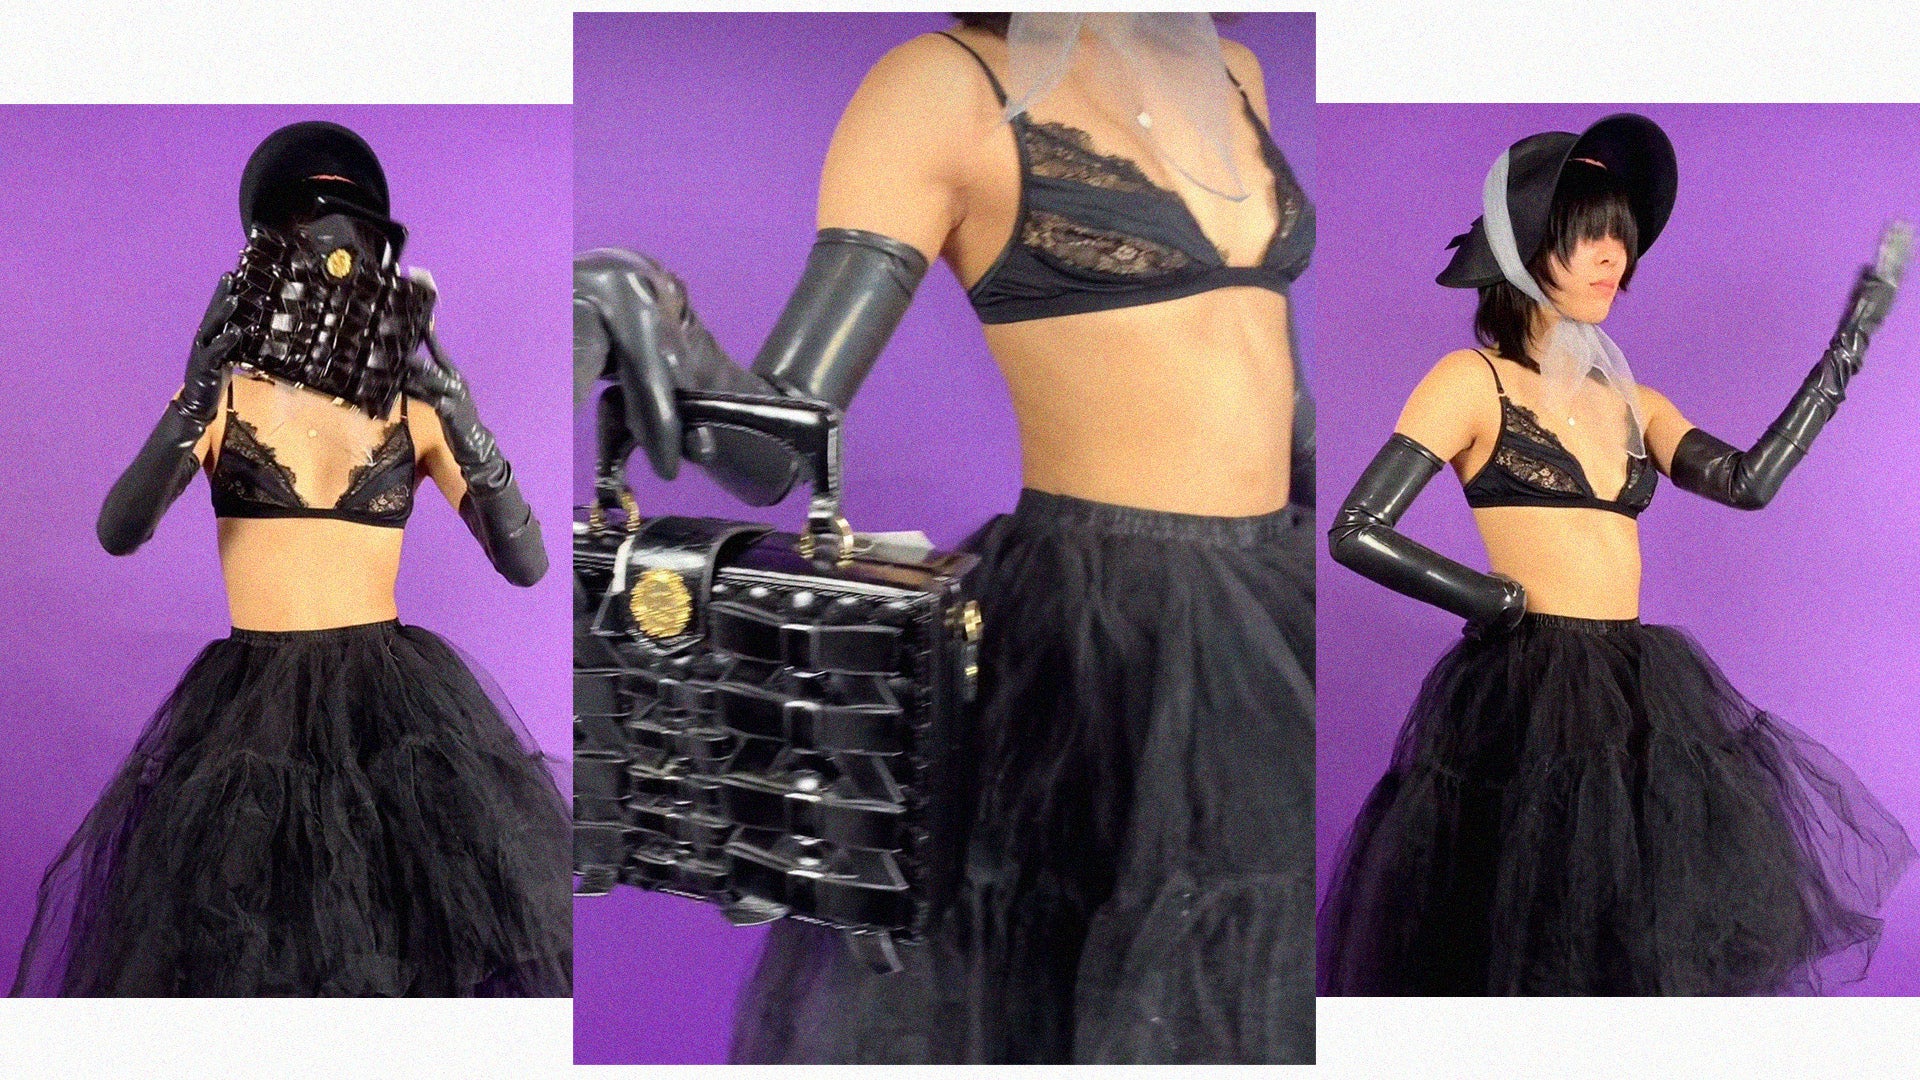 series of three images collaged together of model in black tutu skirt and bra holding bag